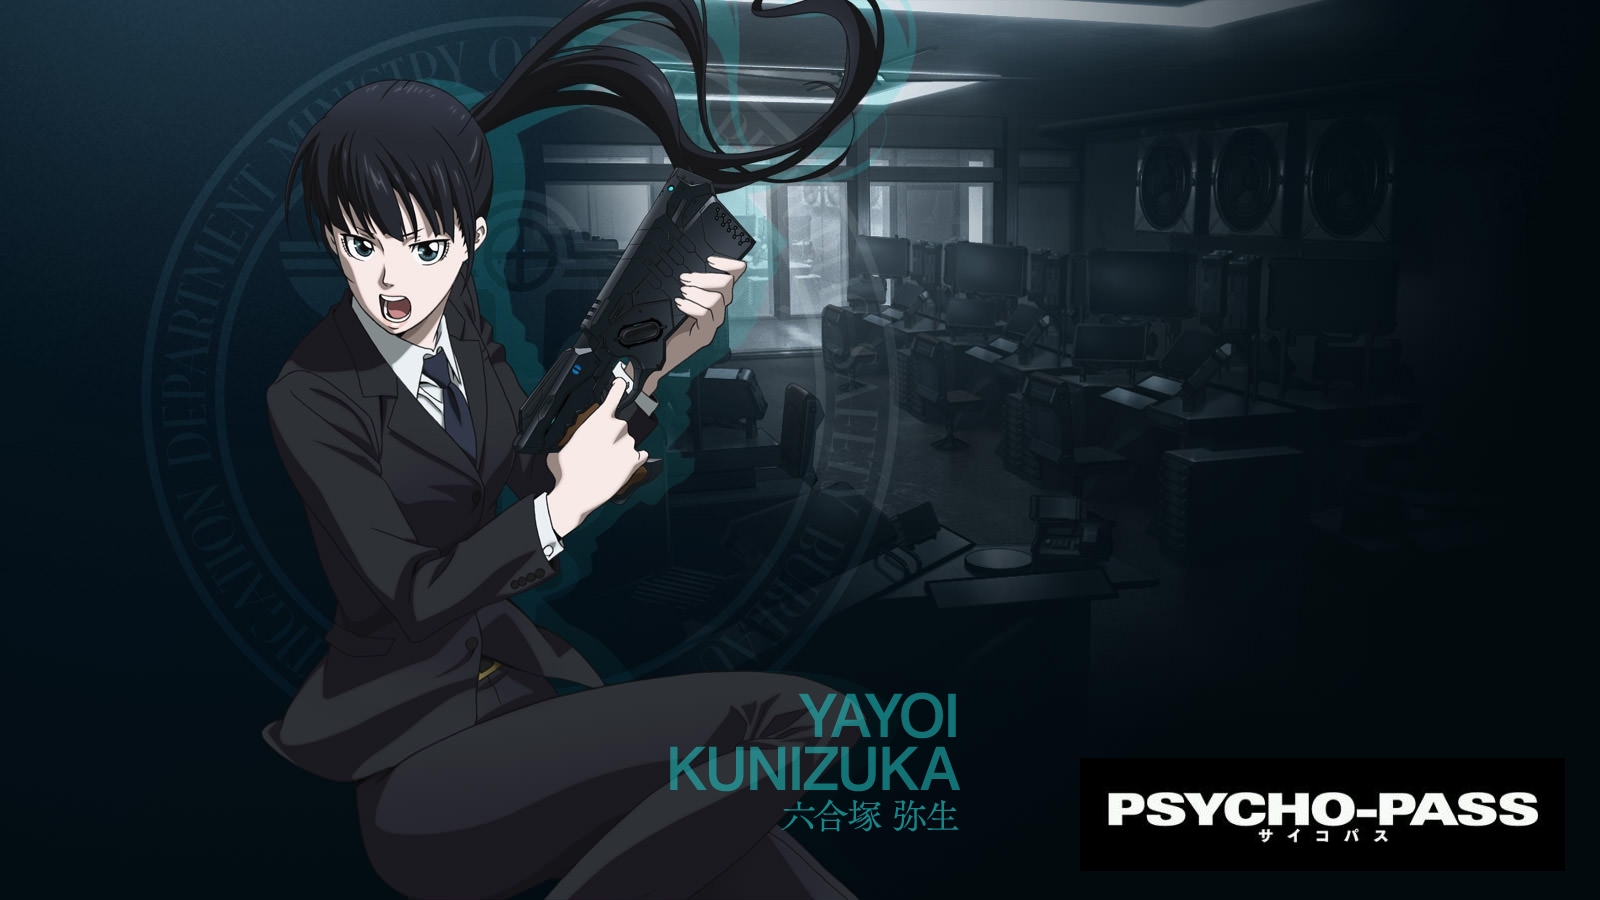 Free Download Wallpapers Psycho Pass 13 1600x900 For Your Desktop Mobile Tablet Explore 78 Psycho Wallpaper American Psycho Wallpaper Psycho Pass Wallpaper Psycho Wallpapers Free Download